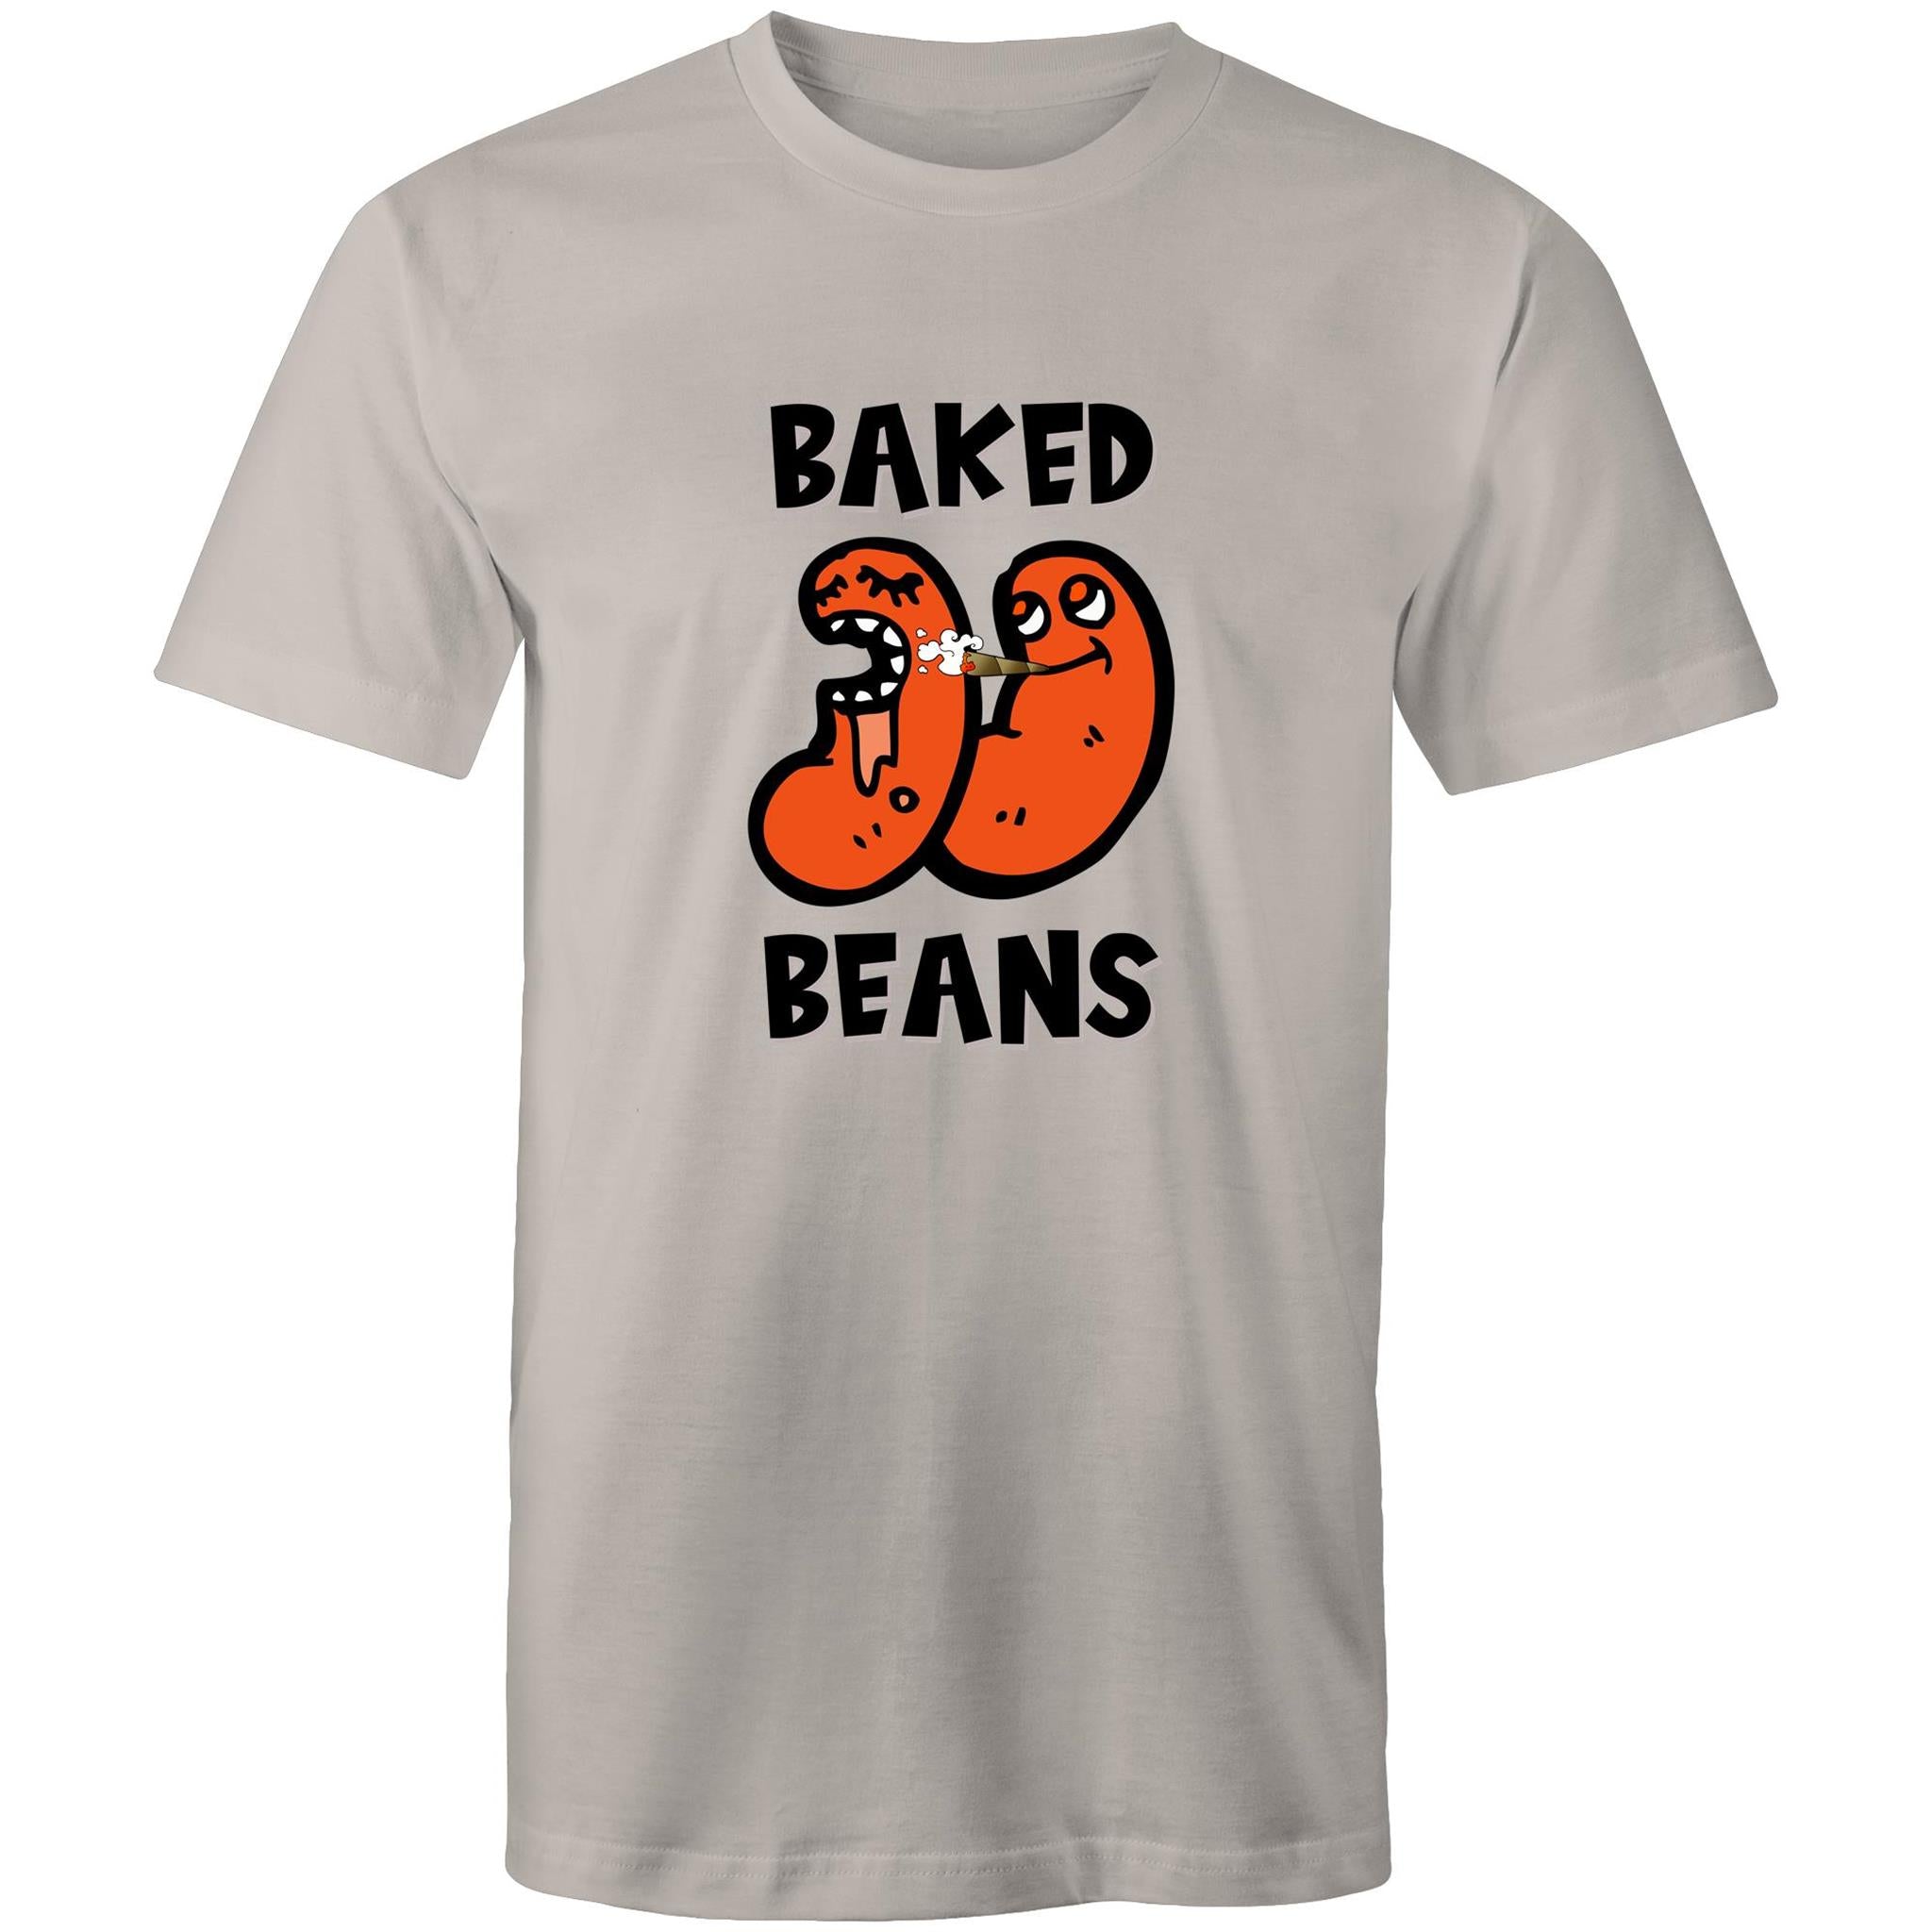 Baked Beans - Mens T-Shirt – the inappropriate t-shirt co.